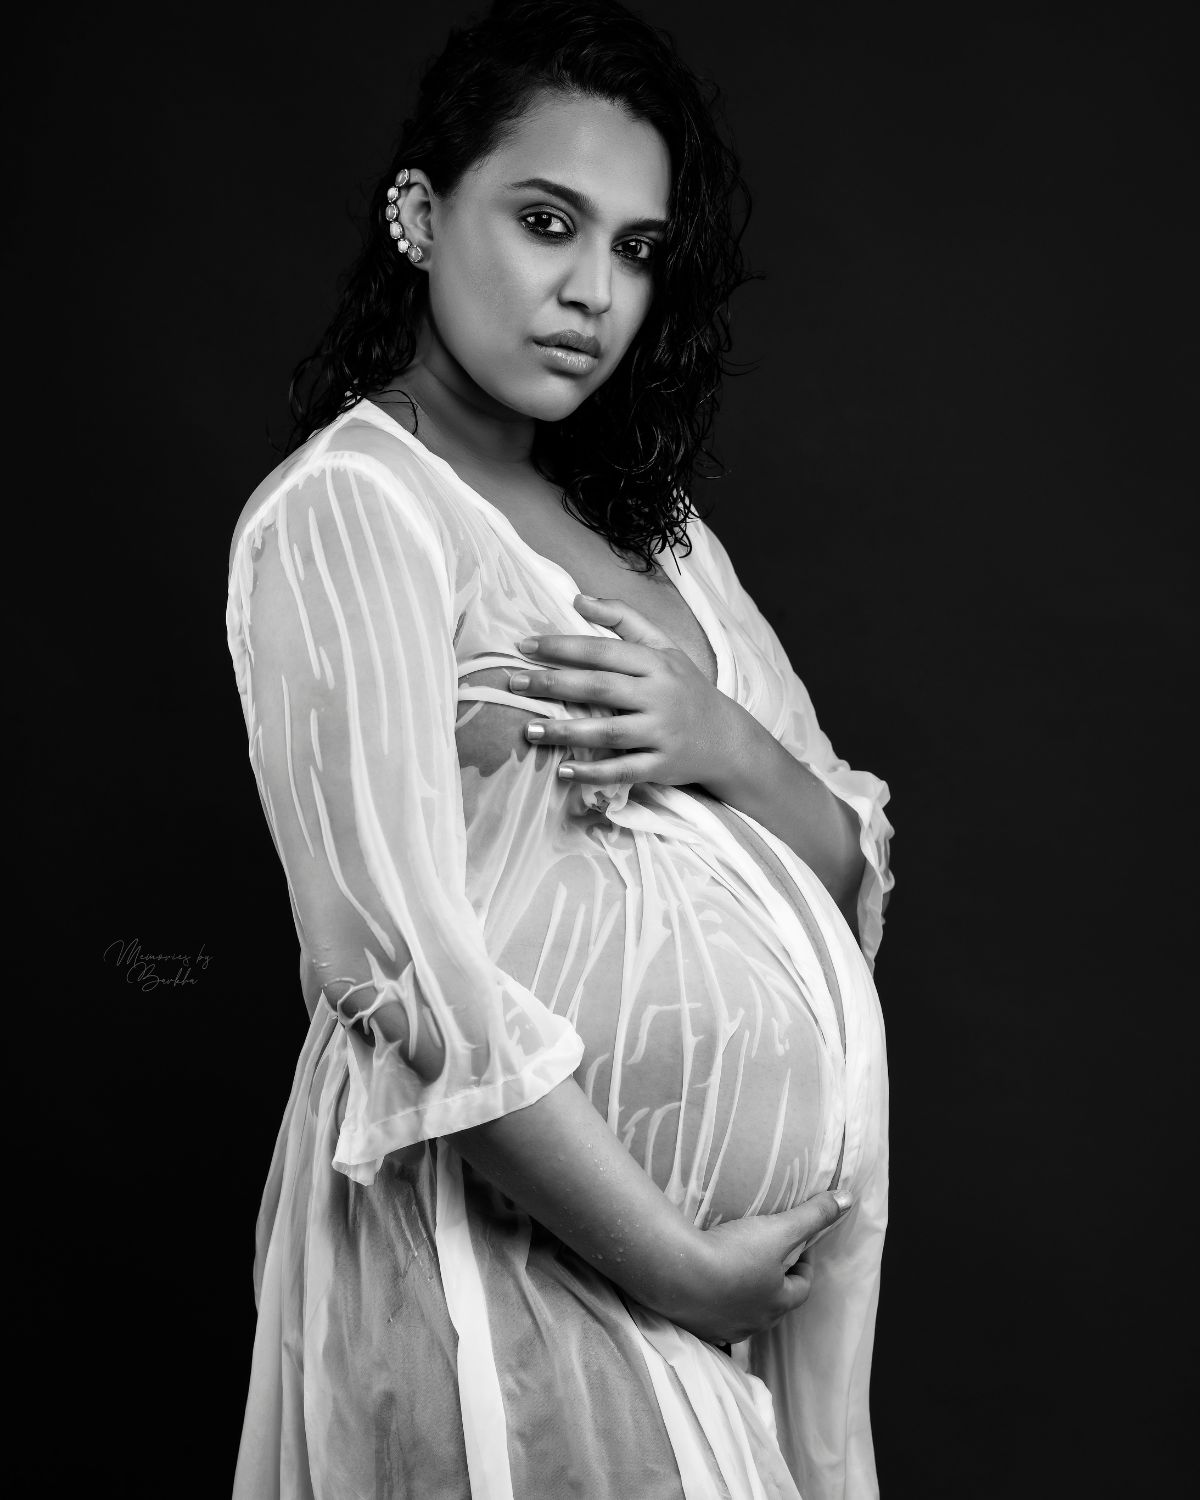 Light and Shadows: Playing with Contrast in Maternity Photography